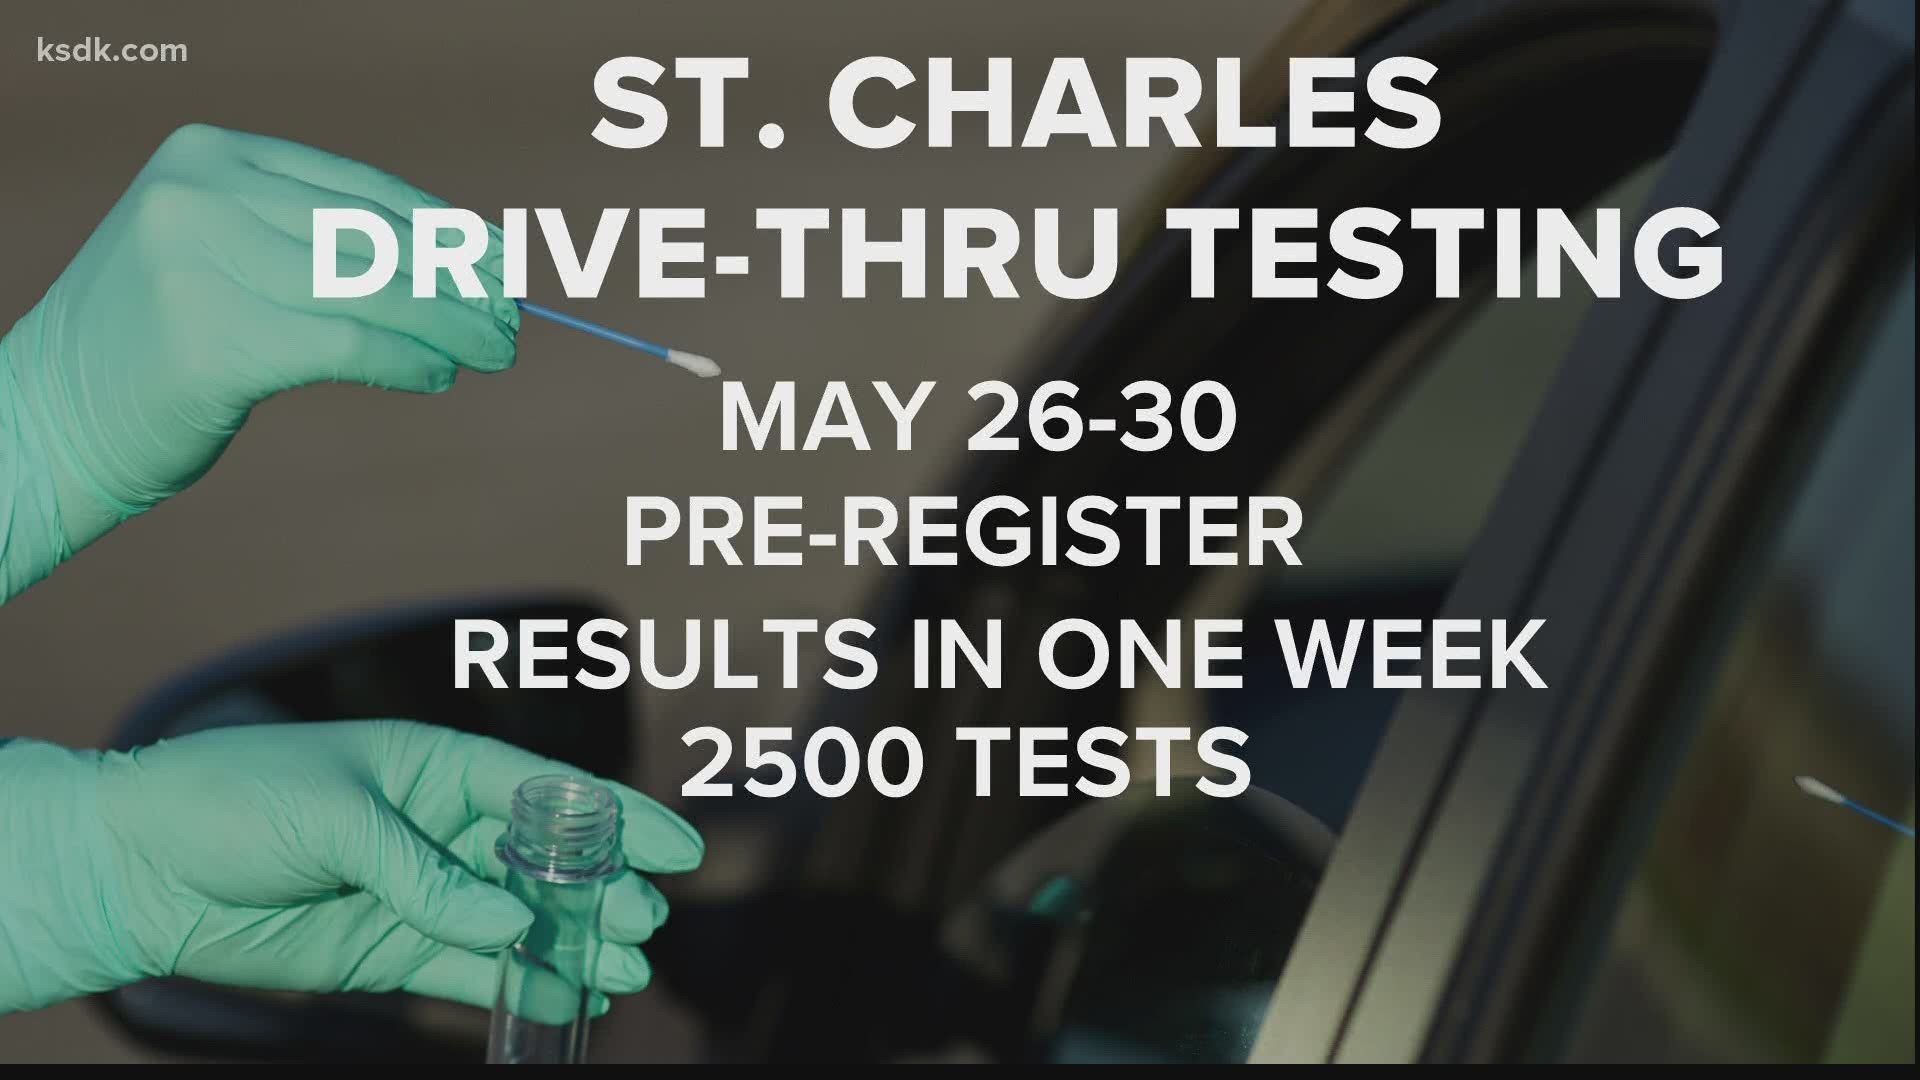 The testing is open to all Missouri residents who register online, regardless if they have symptoms or not